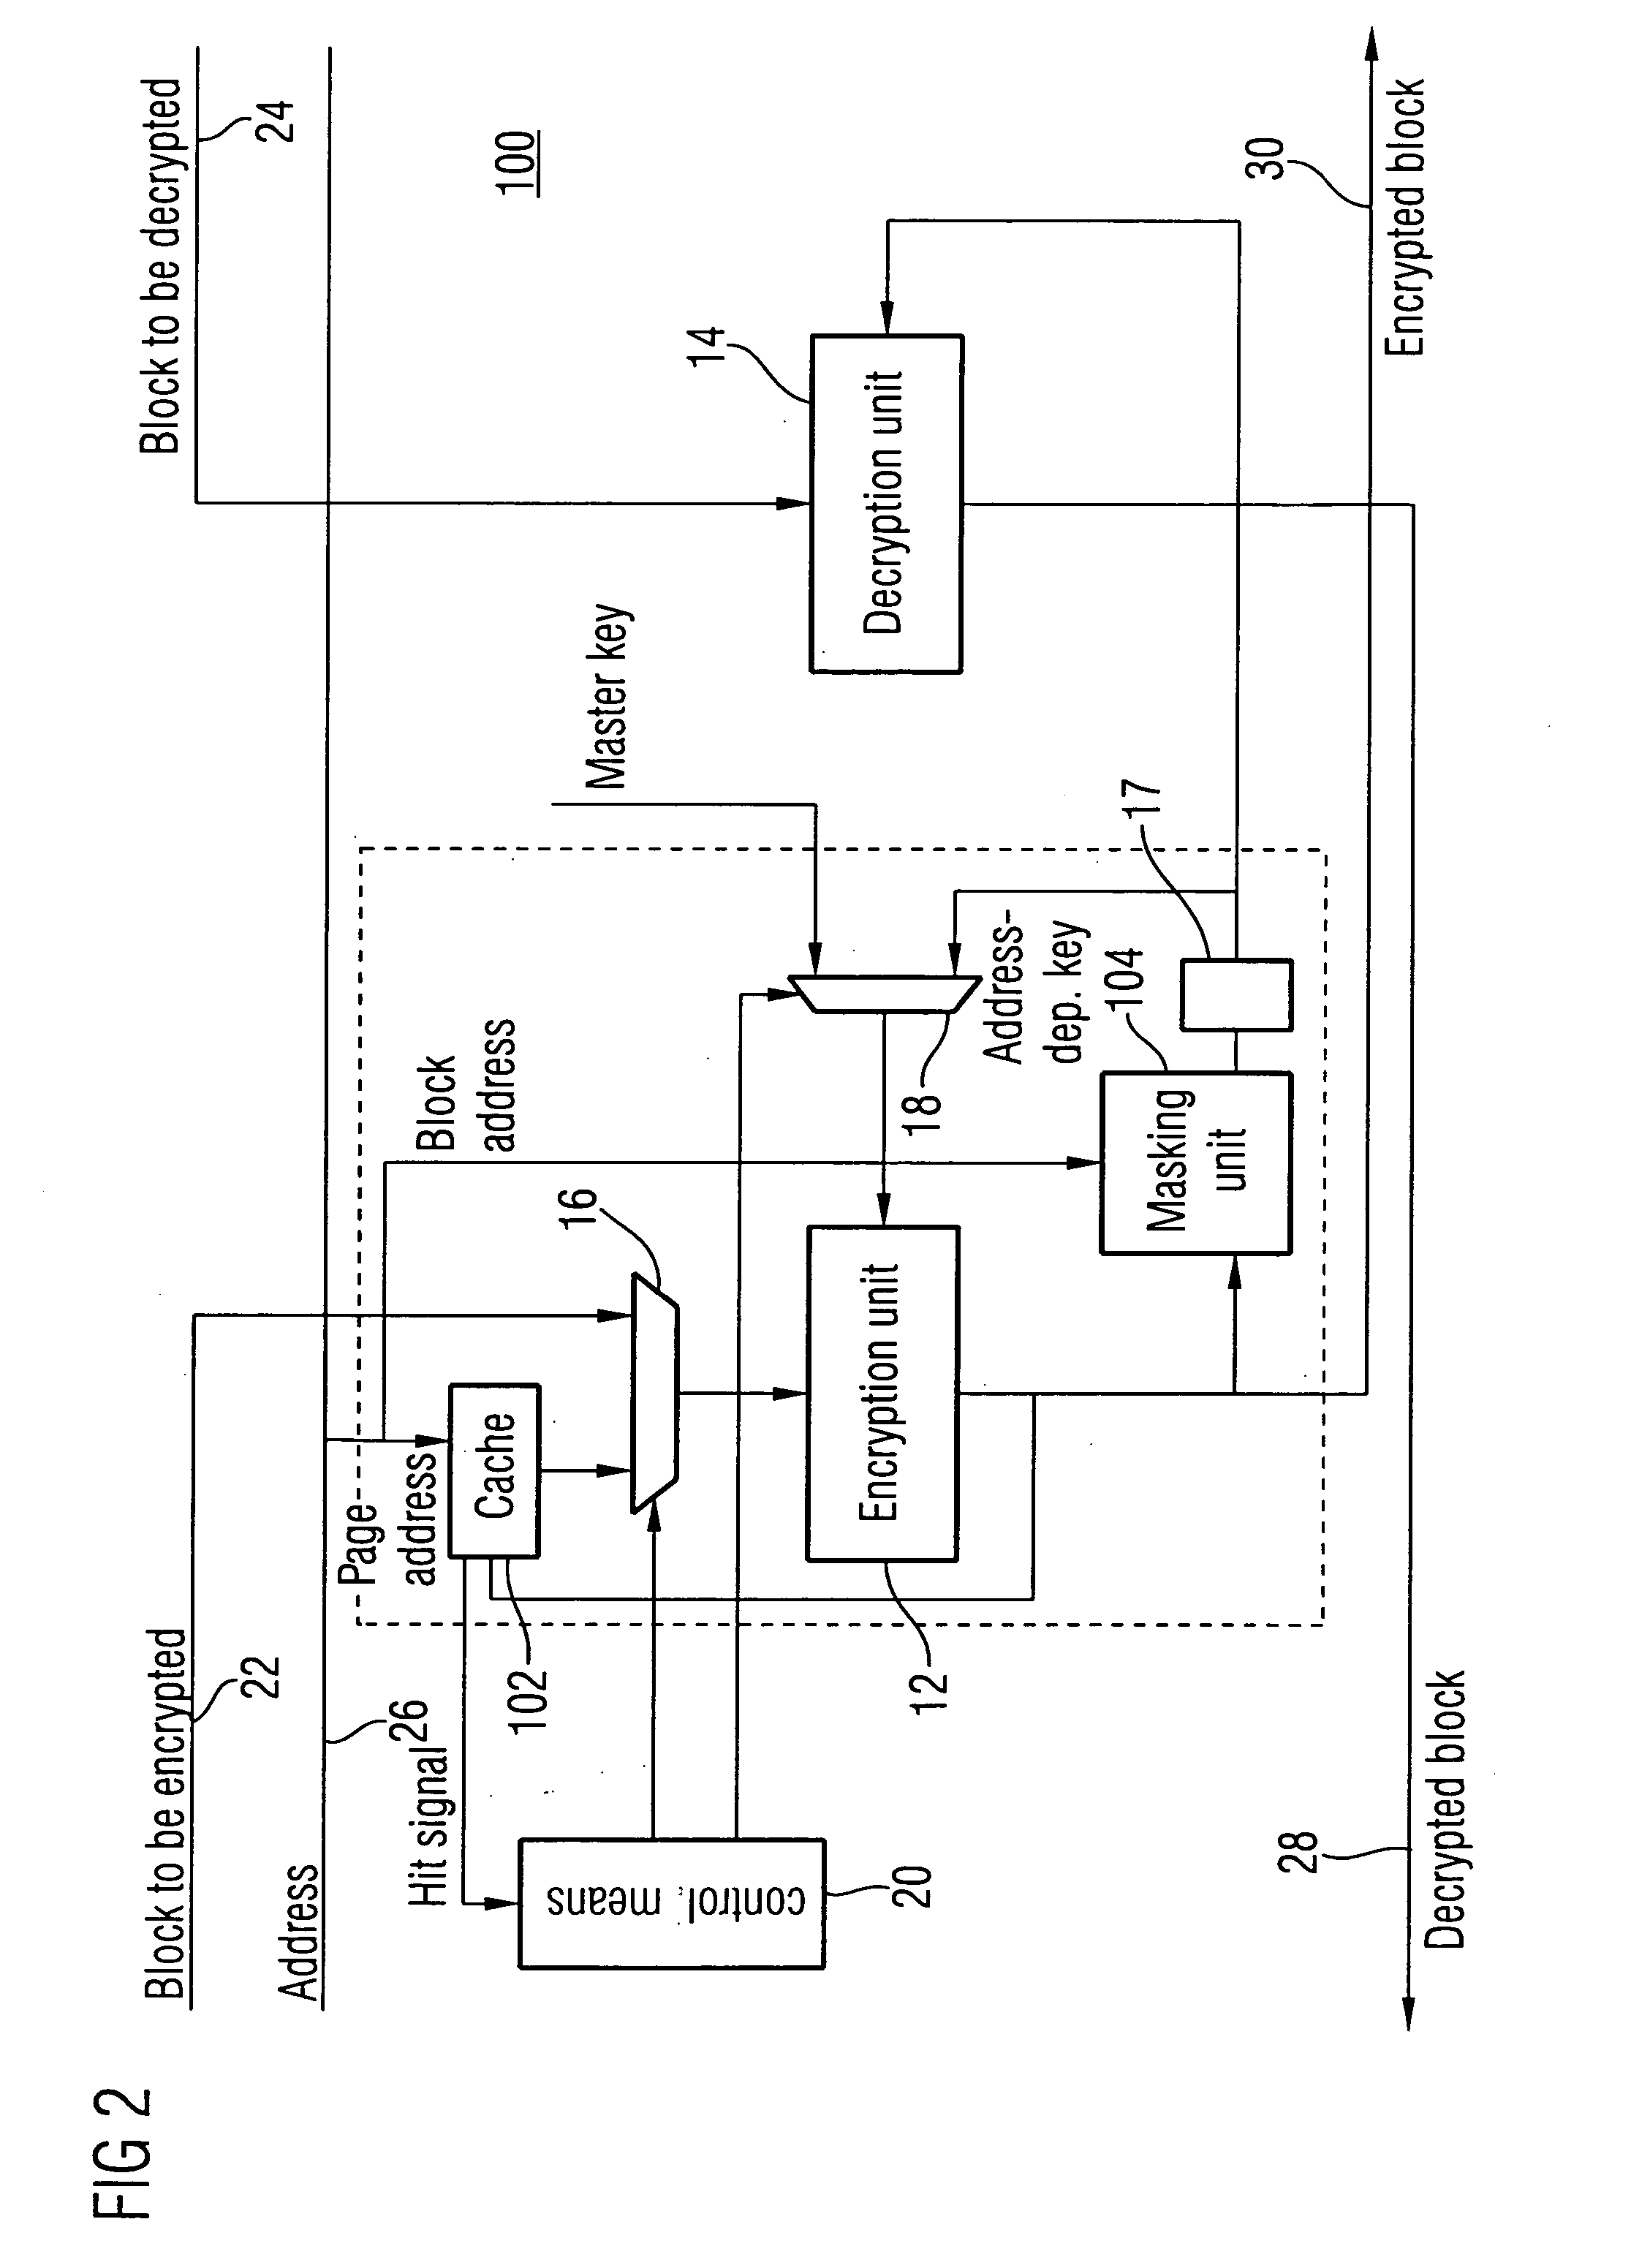 Decryption and encryption during write accesses to a memory